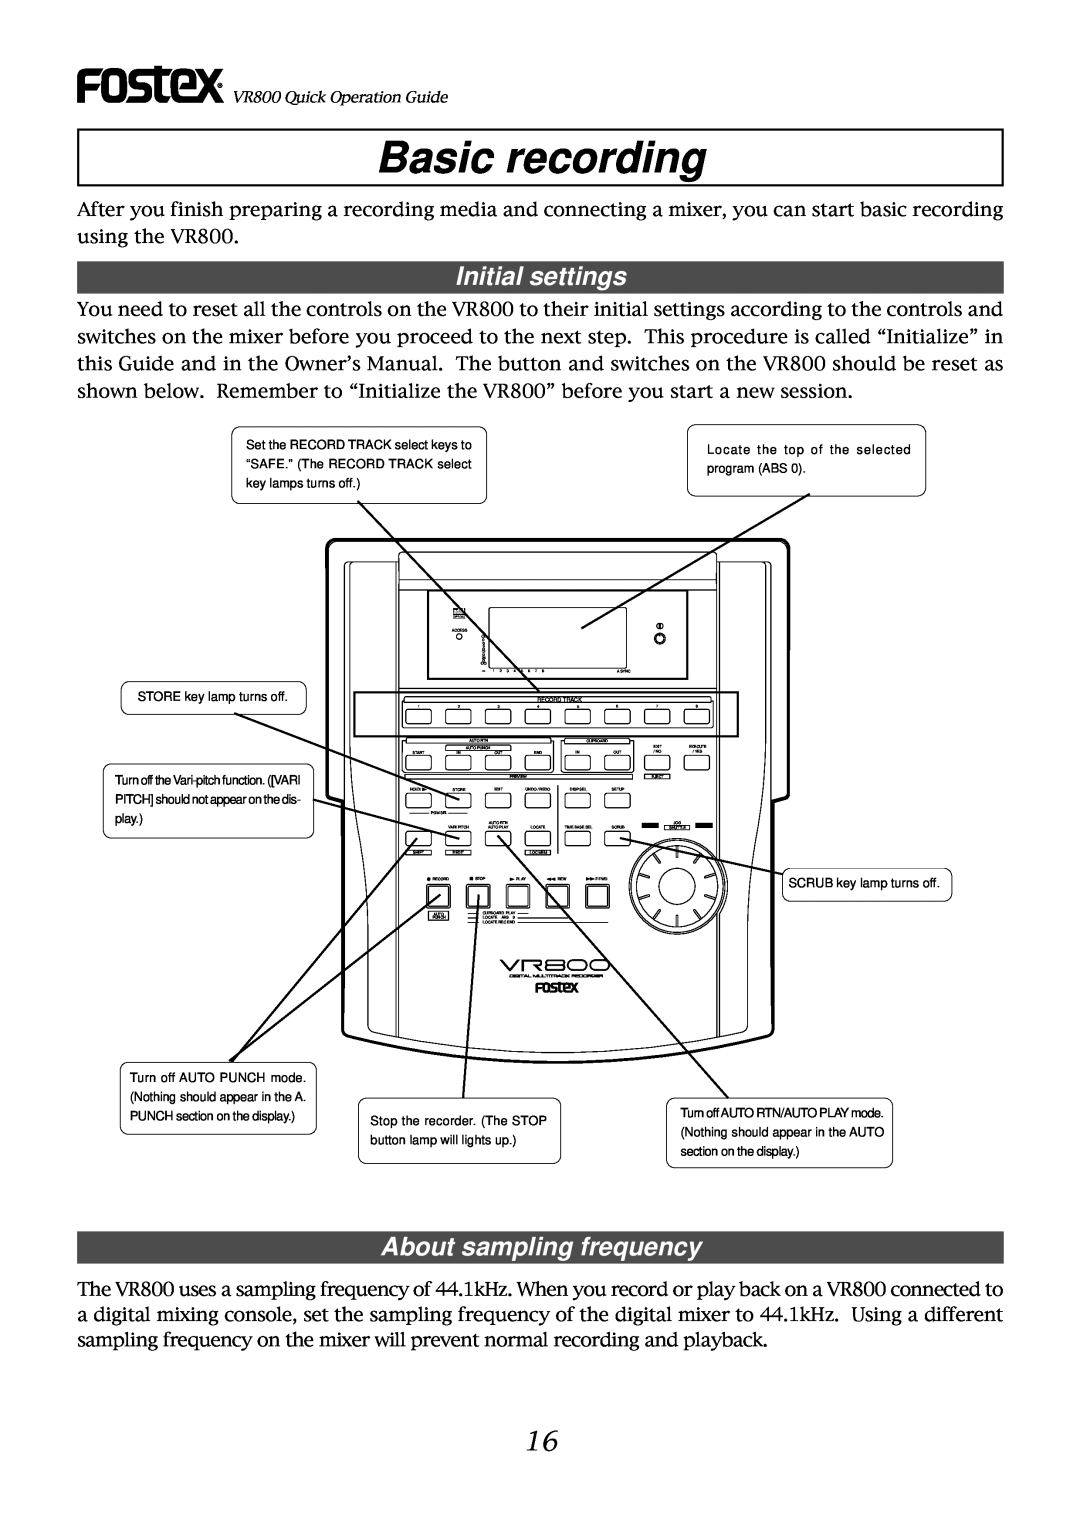 Fostex VR800 owner manual Basic recording, Initial settings, About sampling frequency 